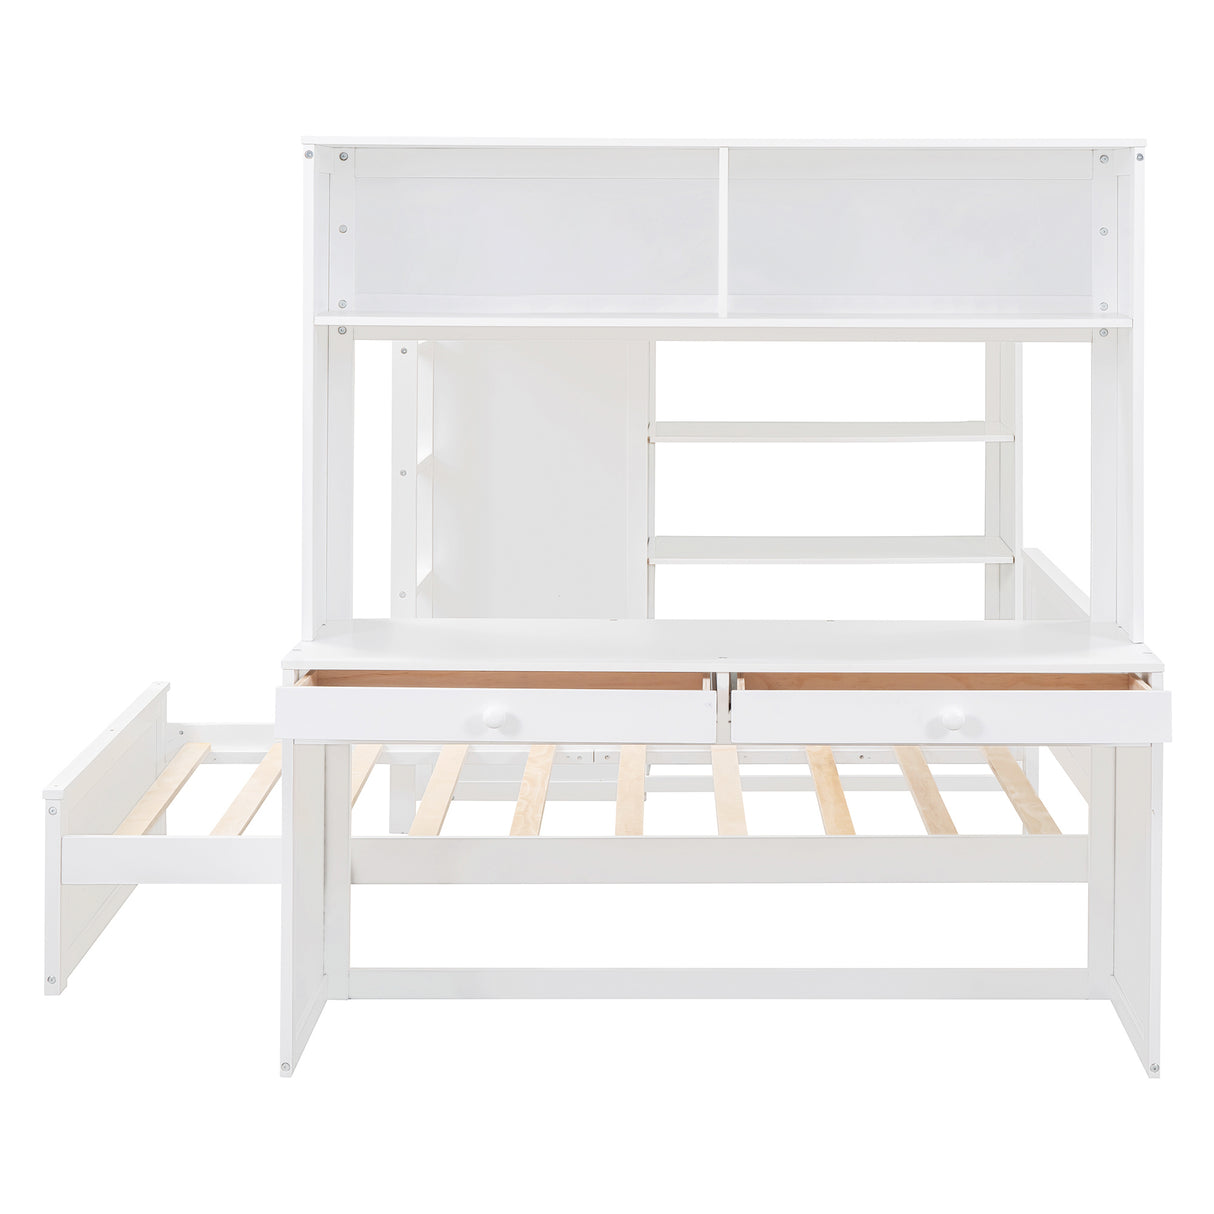 Full size Loft Bed with a twin size Stand-alone bed, Shelves,Desk,and Wardrobe-White - Home Elegance USA